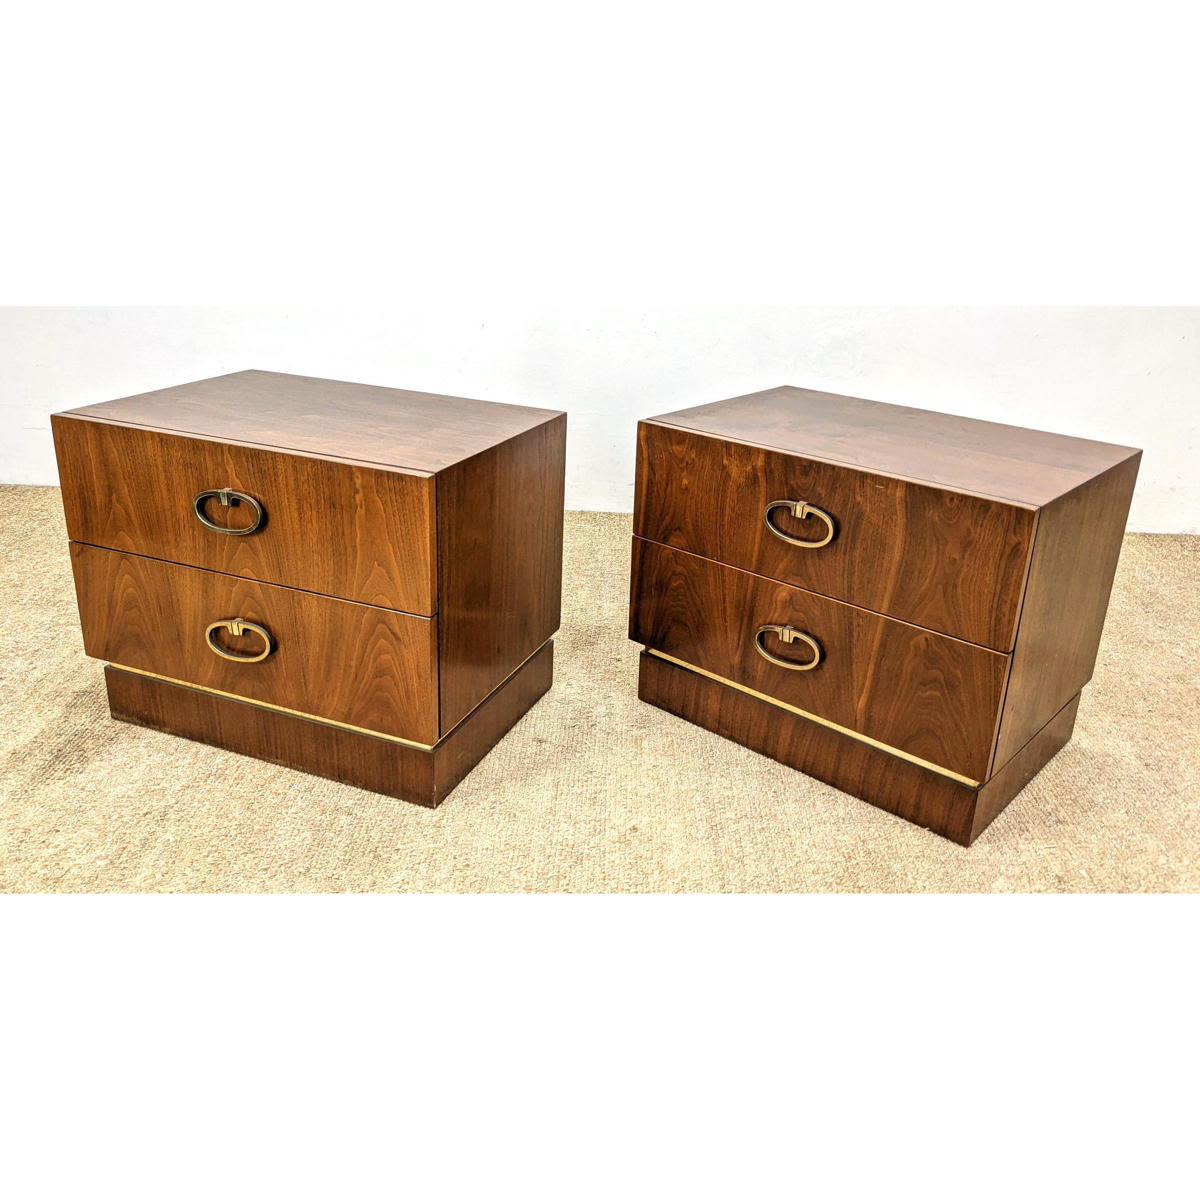 Pr FOUNDERS Two Drawer Cabinets 3acbdc